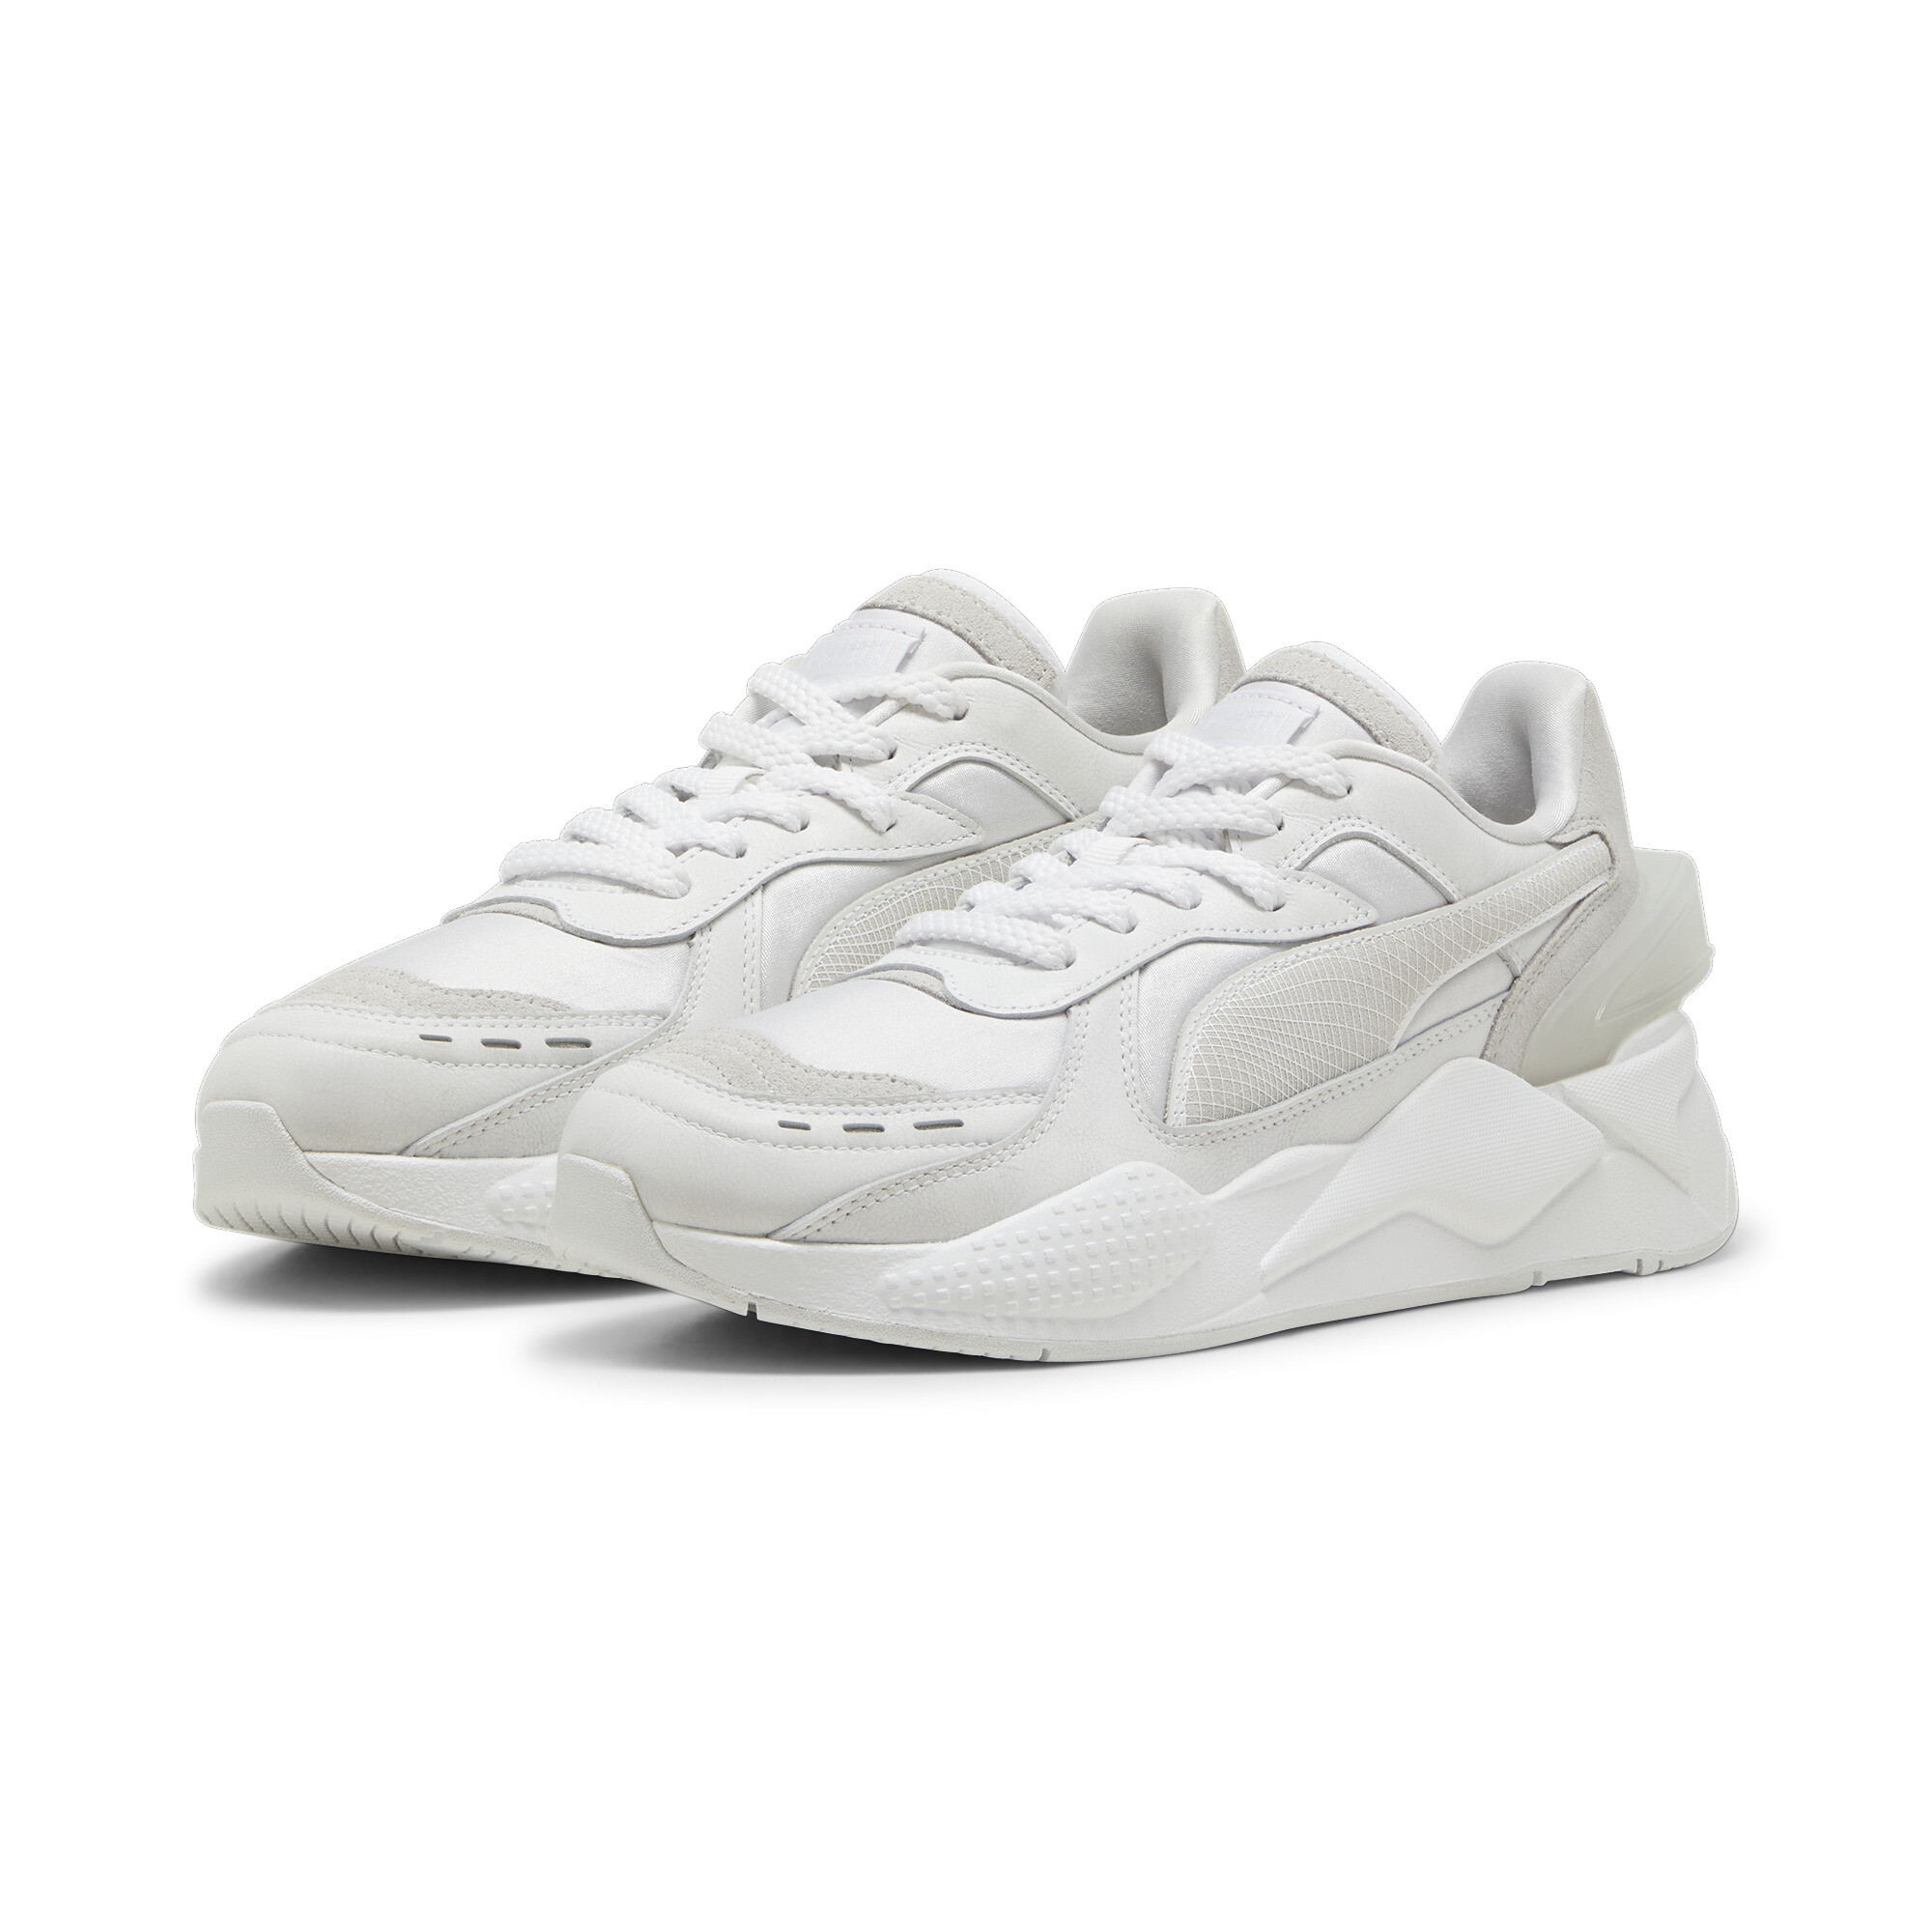 Puma RS-X 40th Anniversary Sneakers, White, Size 37.5, Shoes